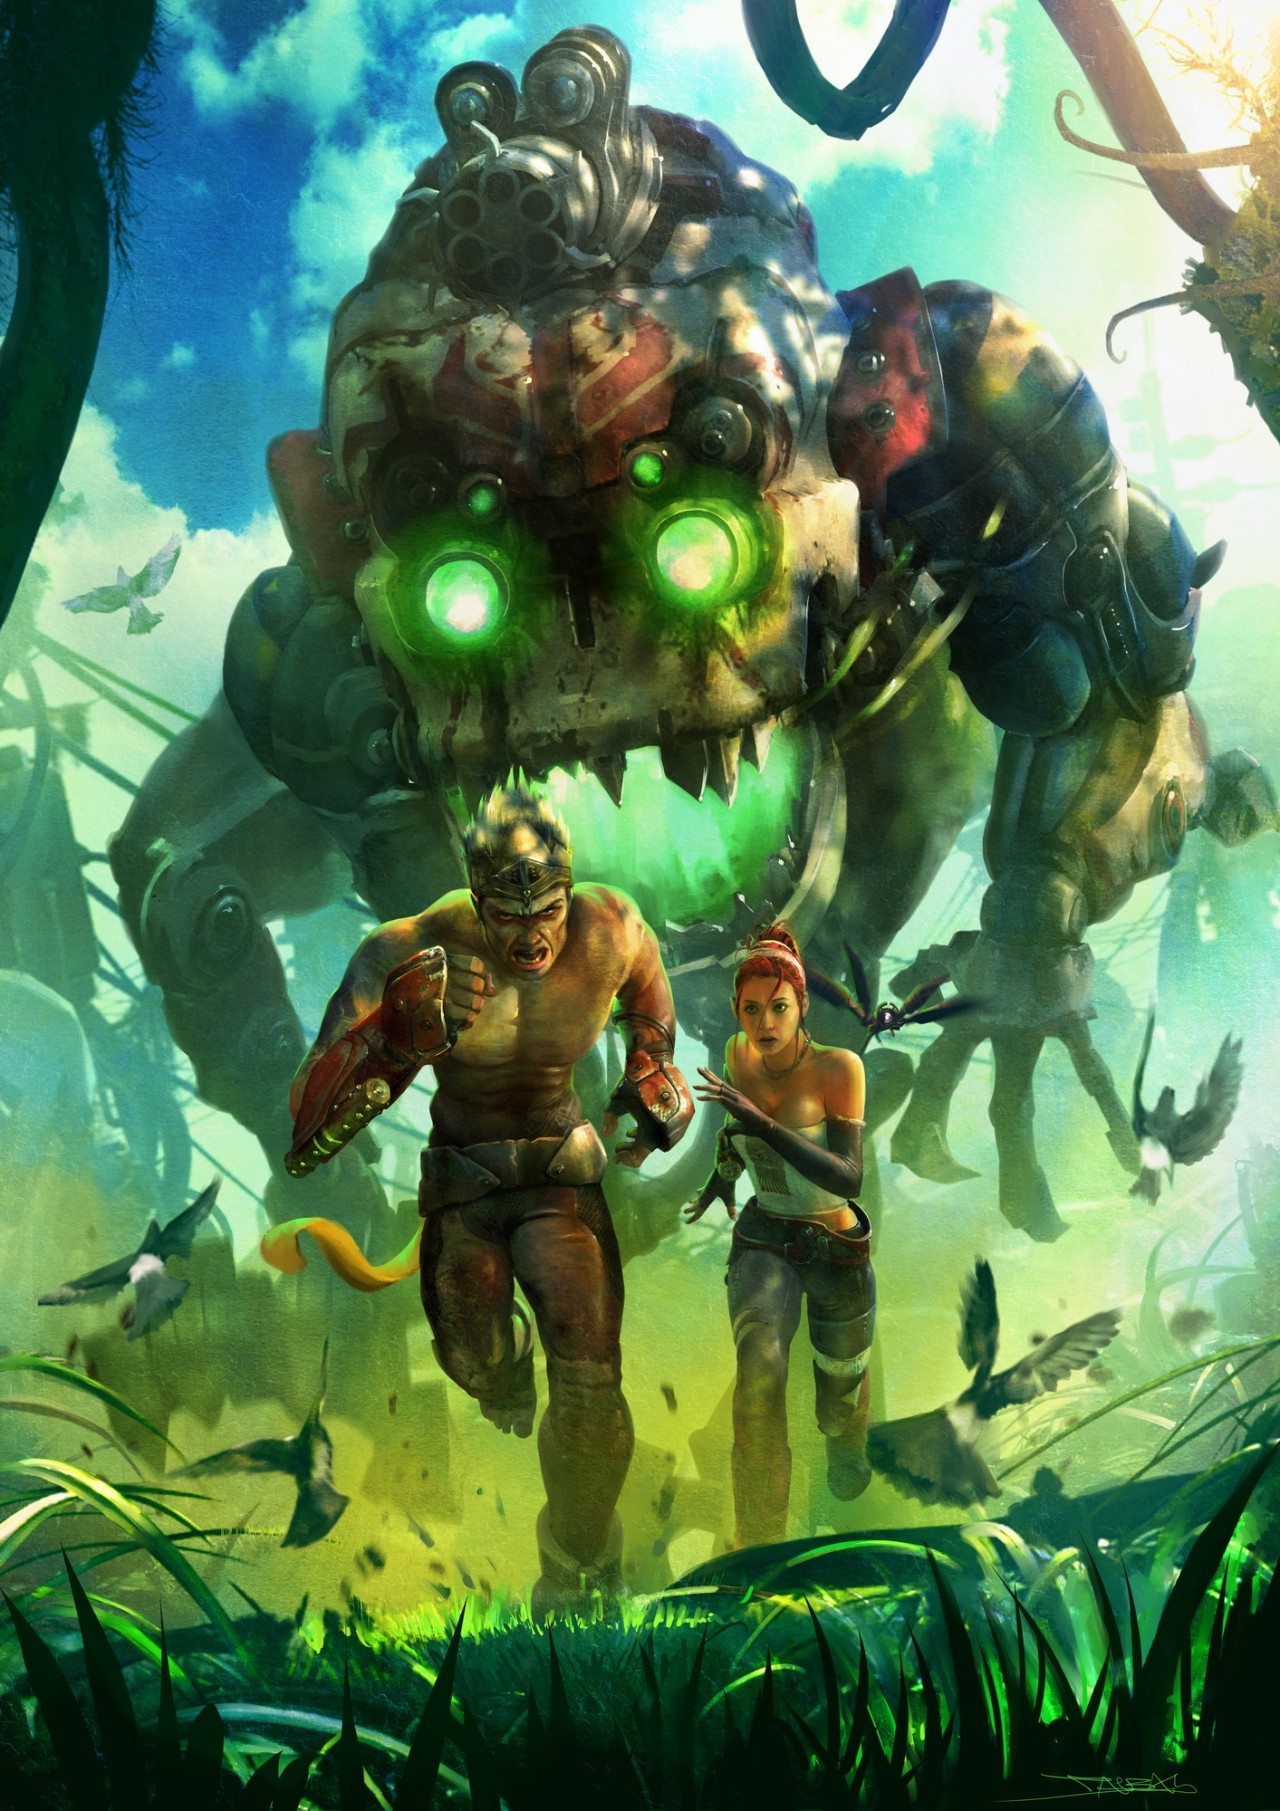 ps3 enslaved odyssey to the west download